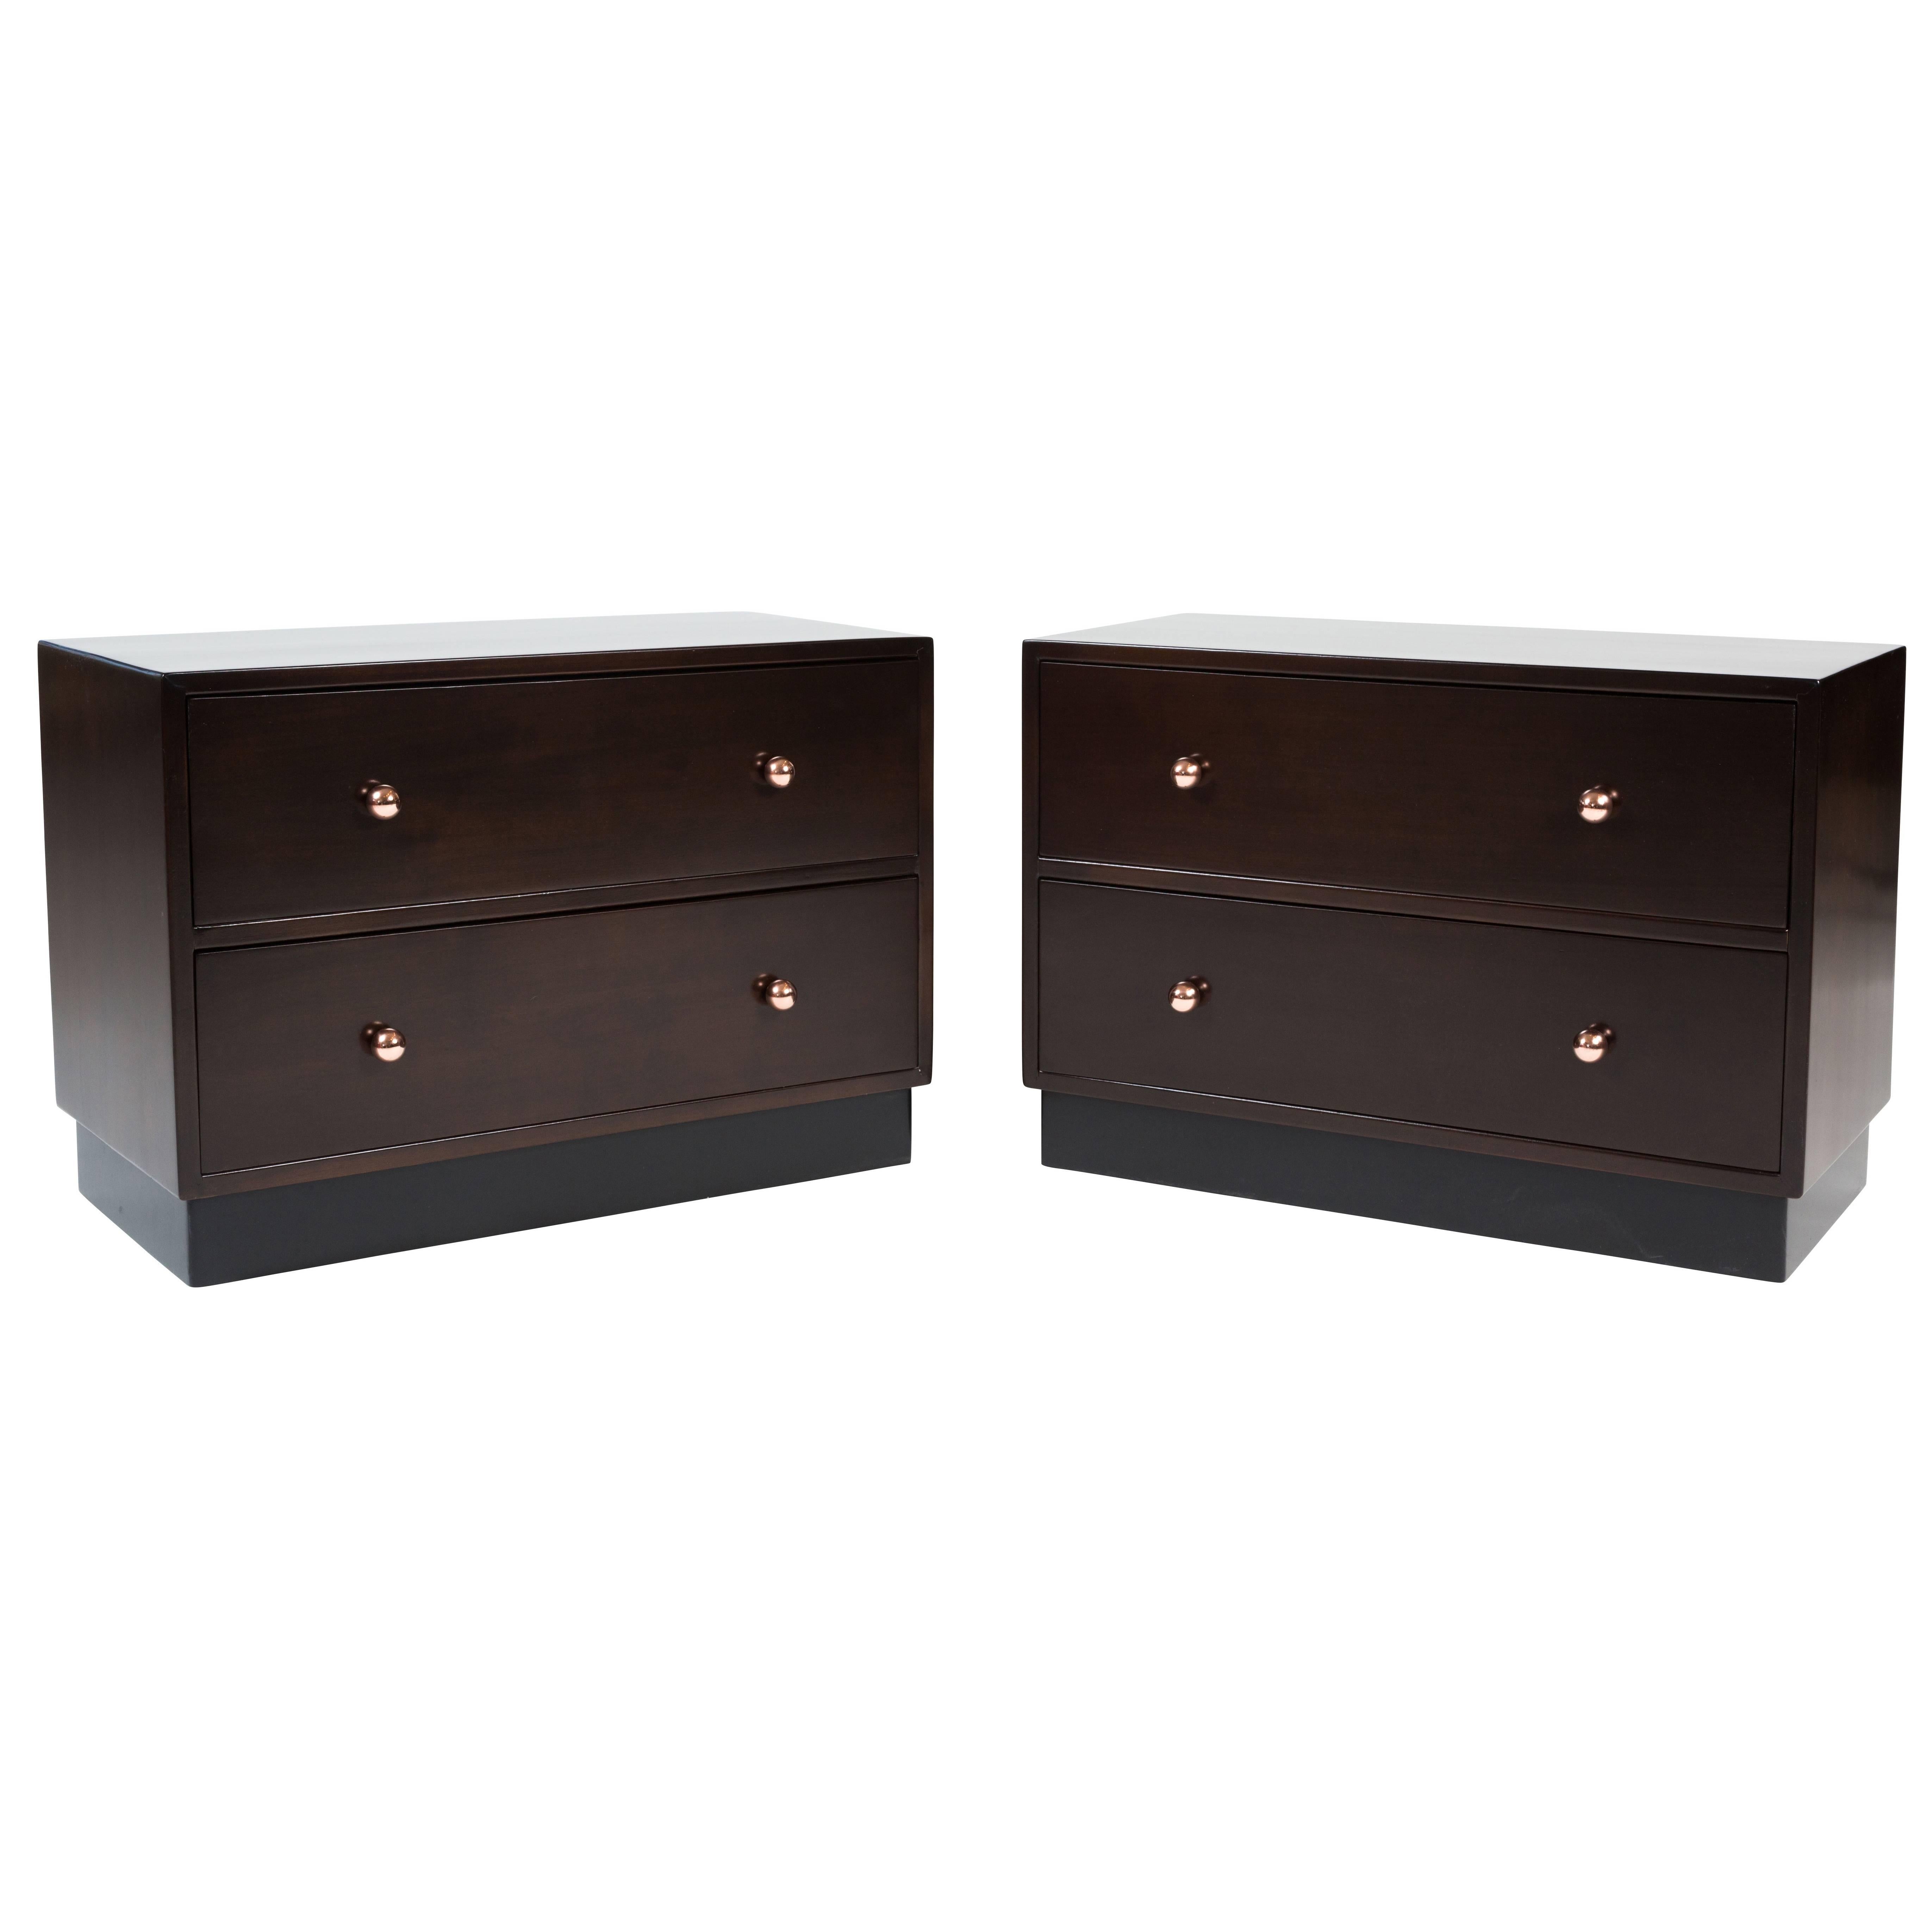 Pair of Two-Drawer Bedside Chests "Modart" by See Furniture